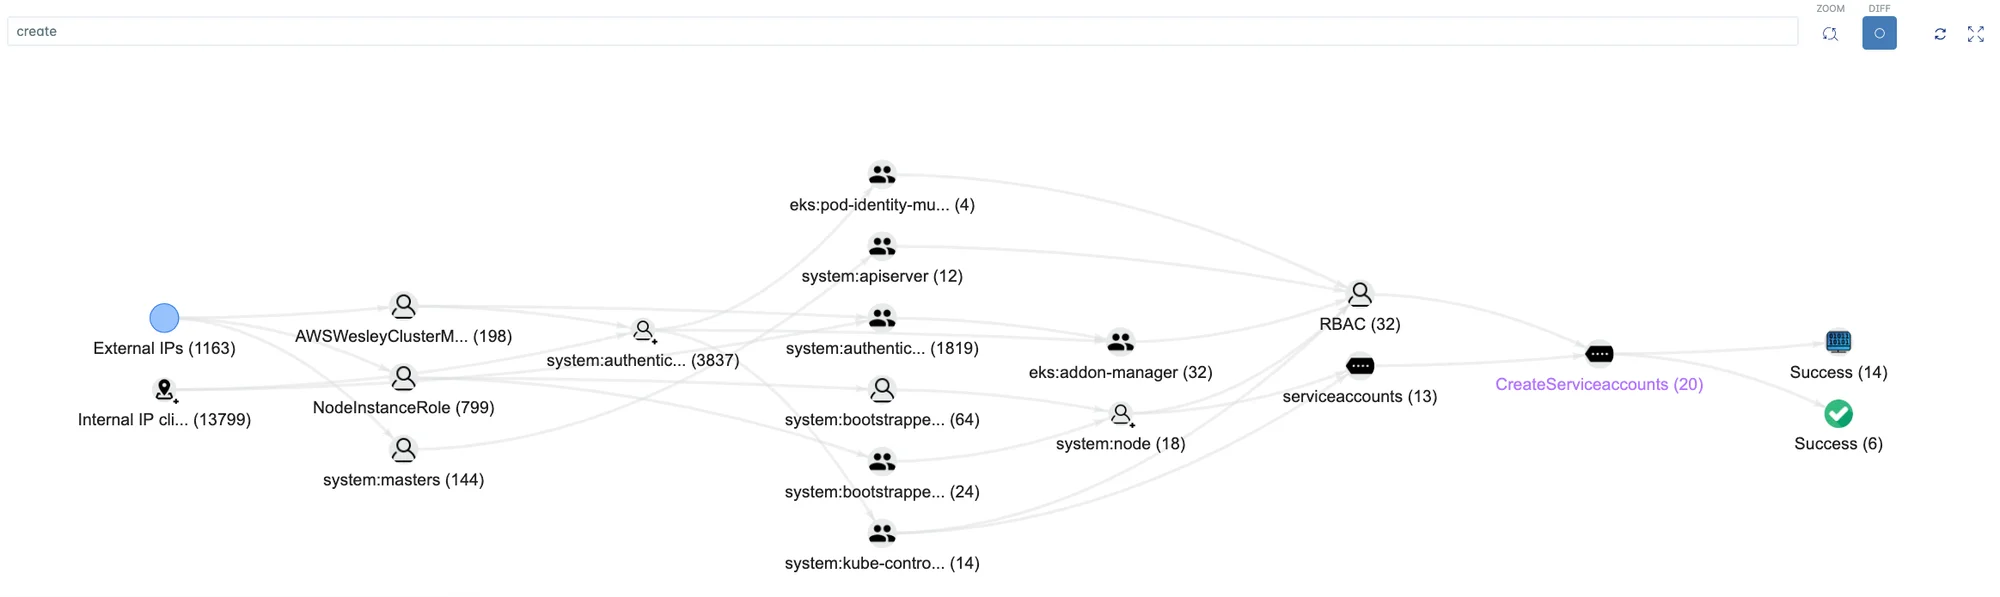 FIGURE 2: Example of the Lacework Polygraph combining Kubernetes audit log events and events from other data sources to automatically identify anomalous activity related to Kubernetes.